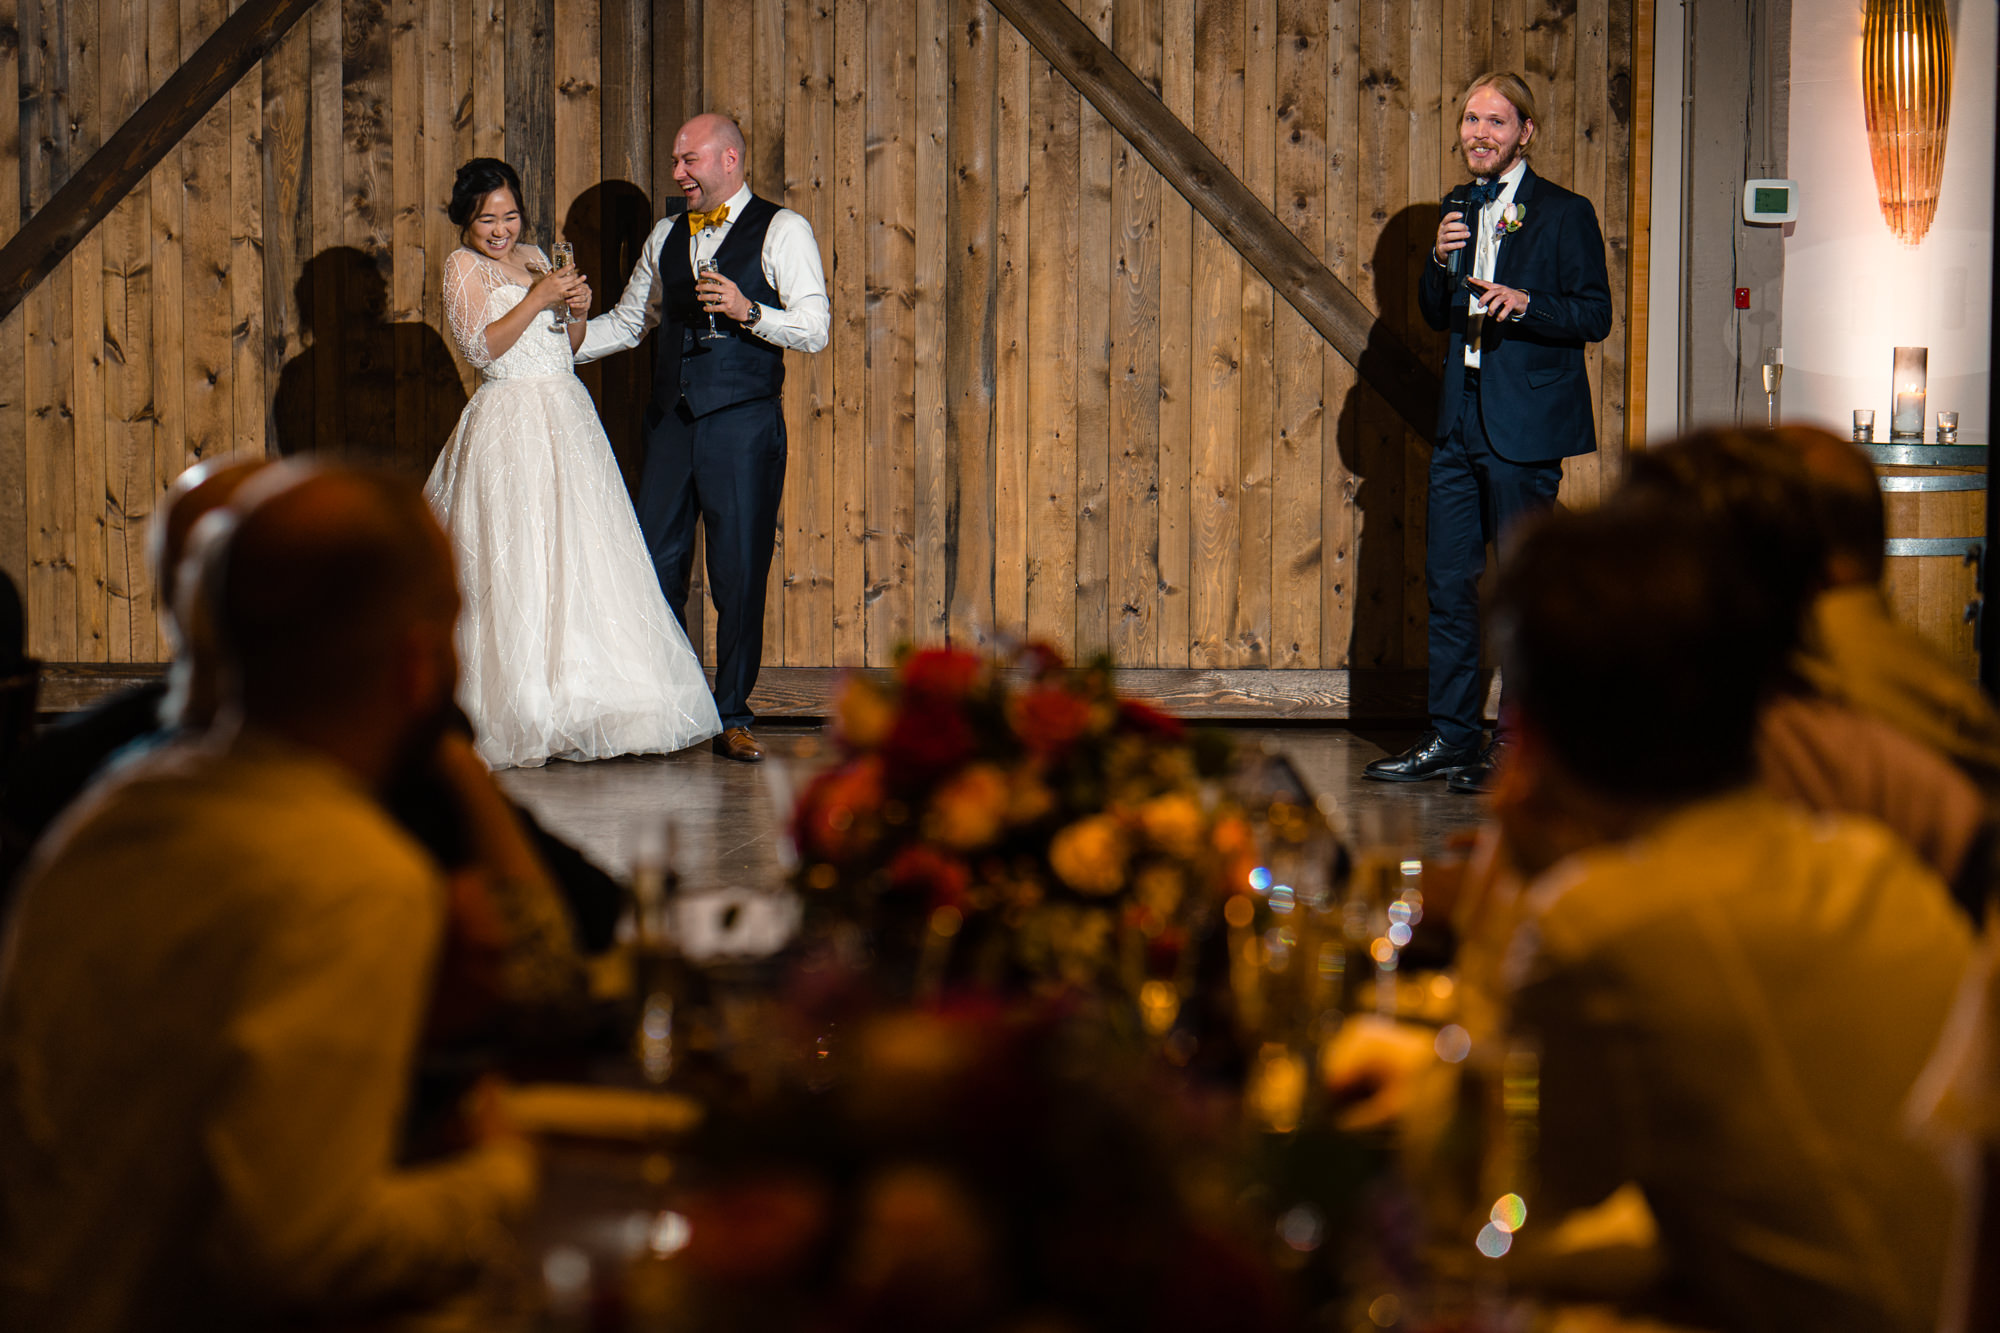 The best man delivers his toast to the bride and groom